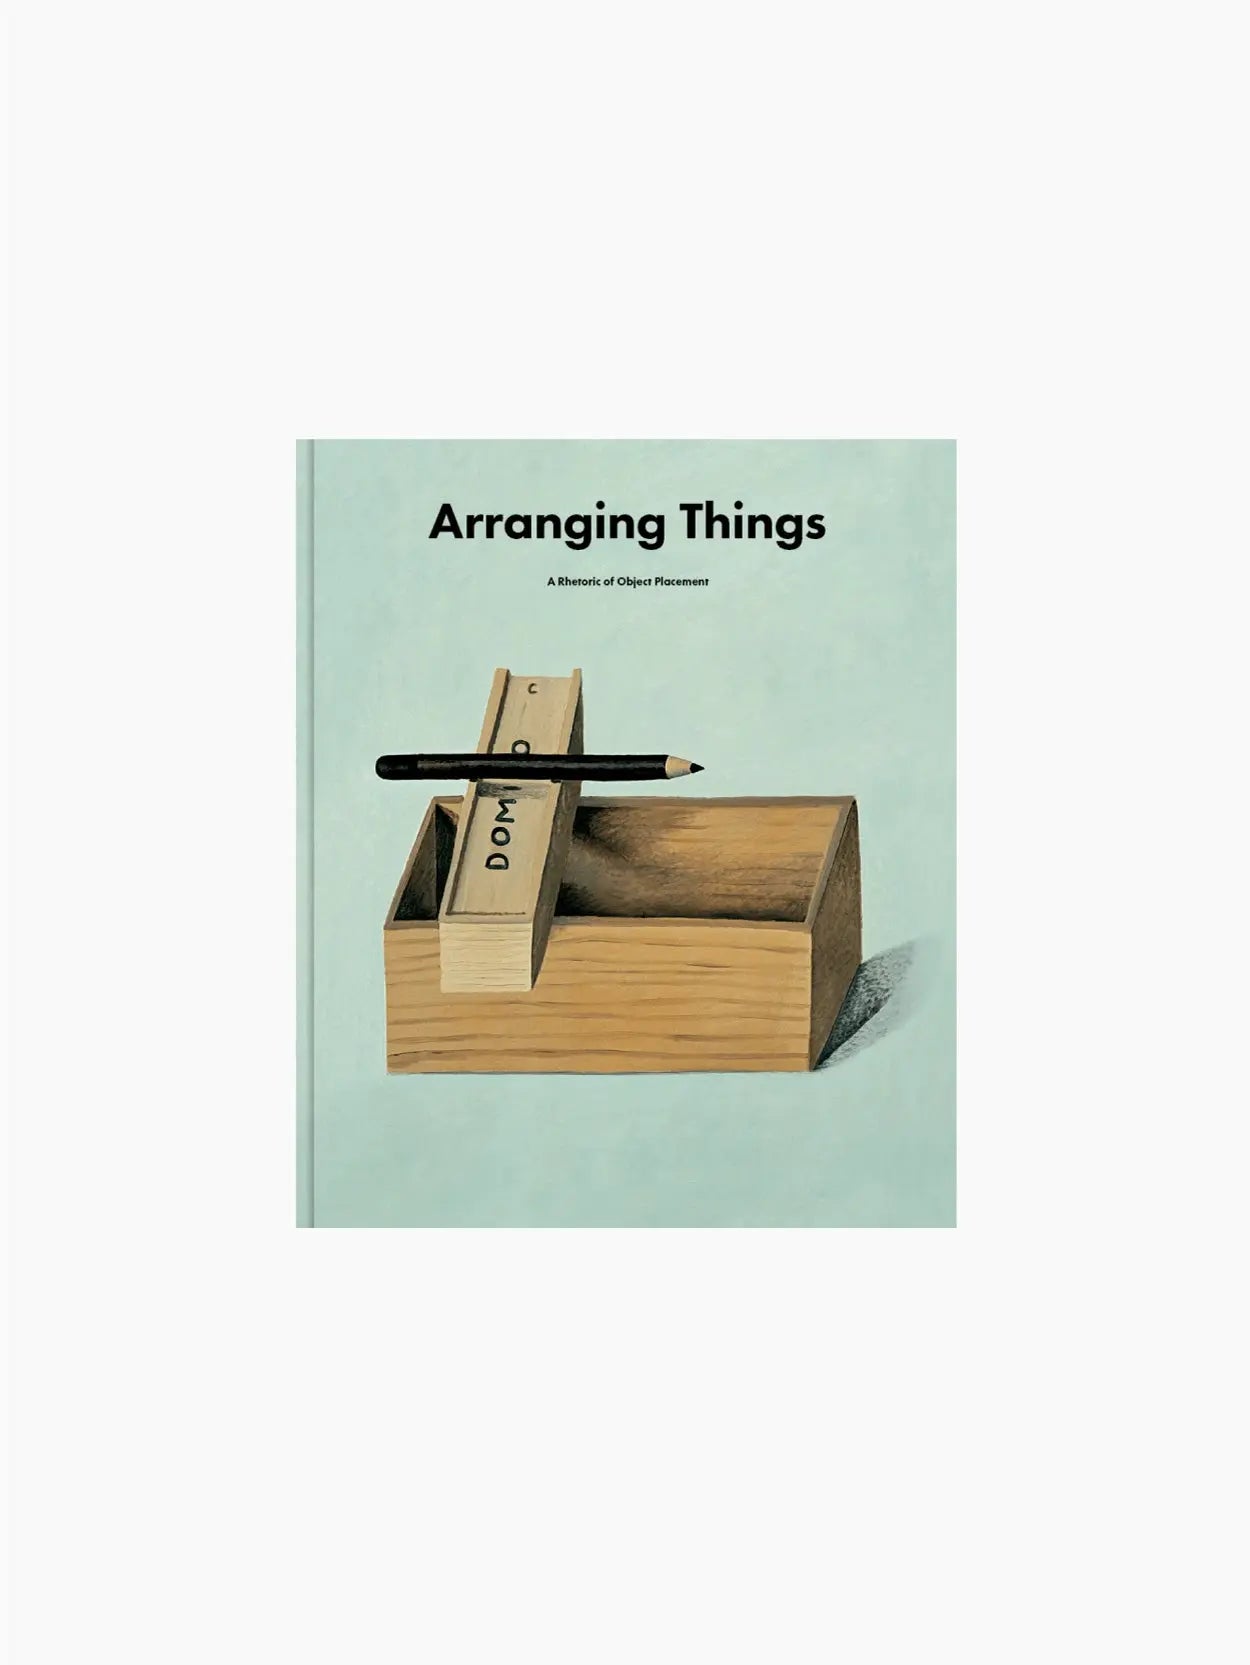 Arranging Things: A Rhetoric of Object Placement Apartamento